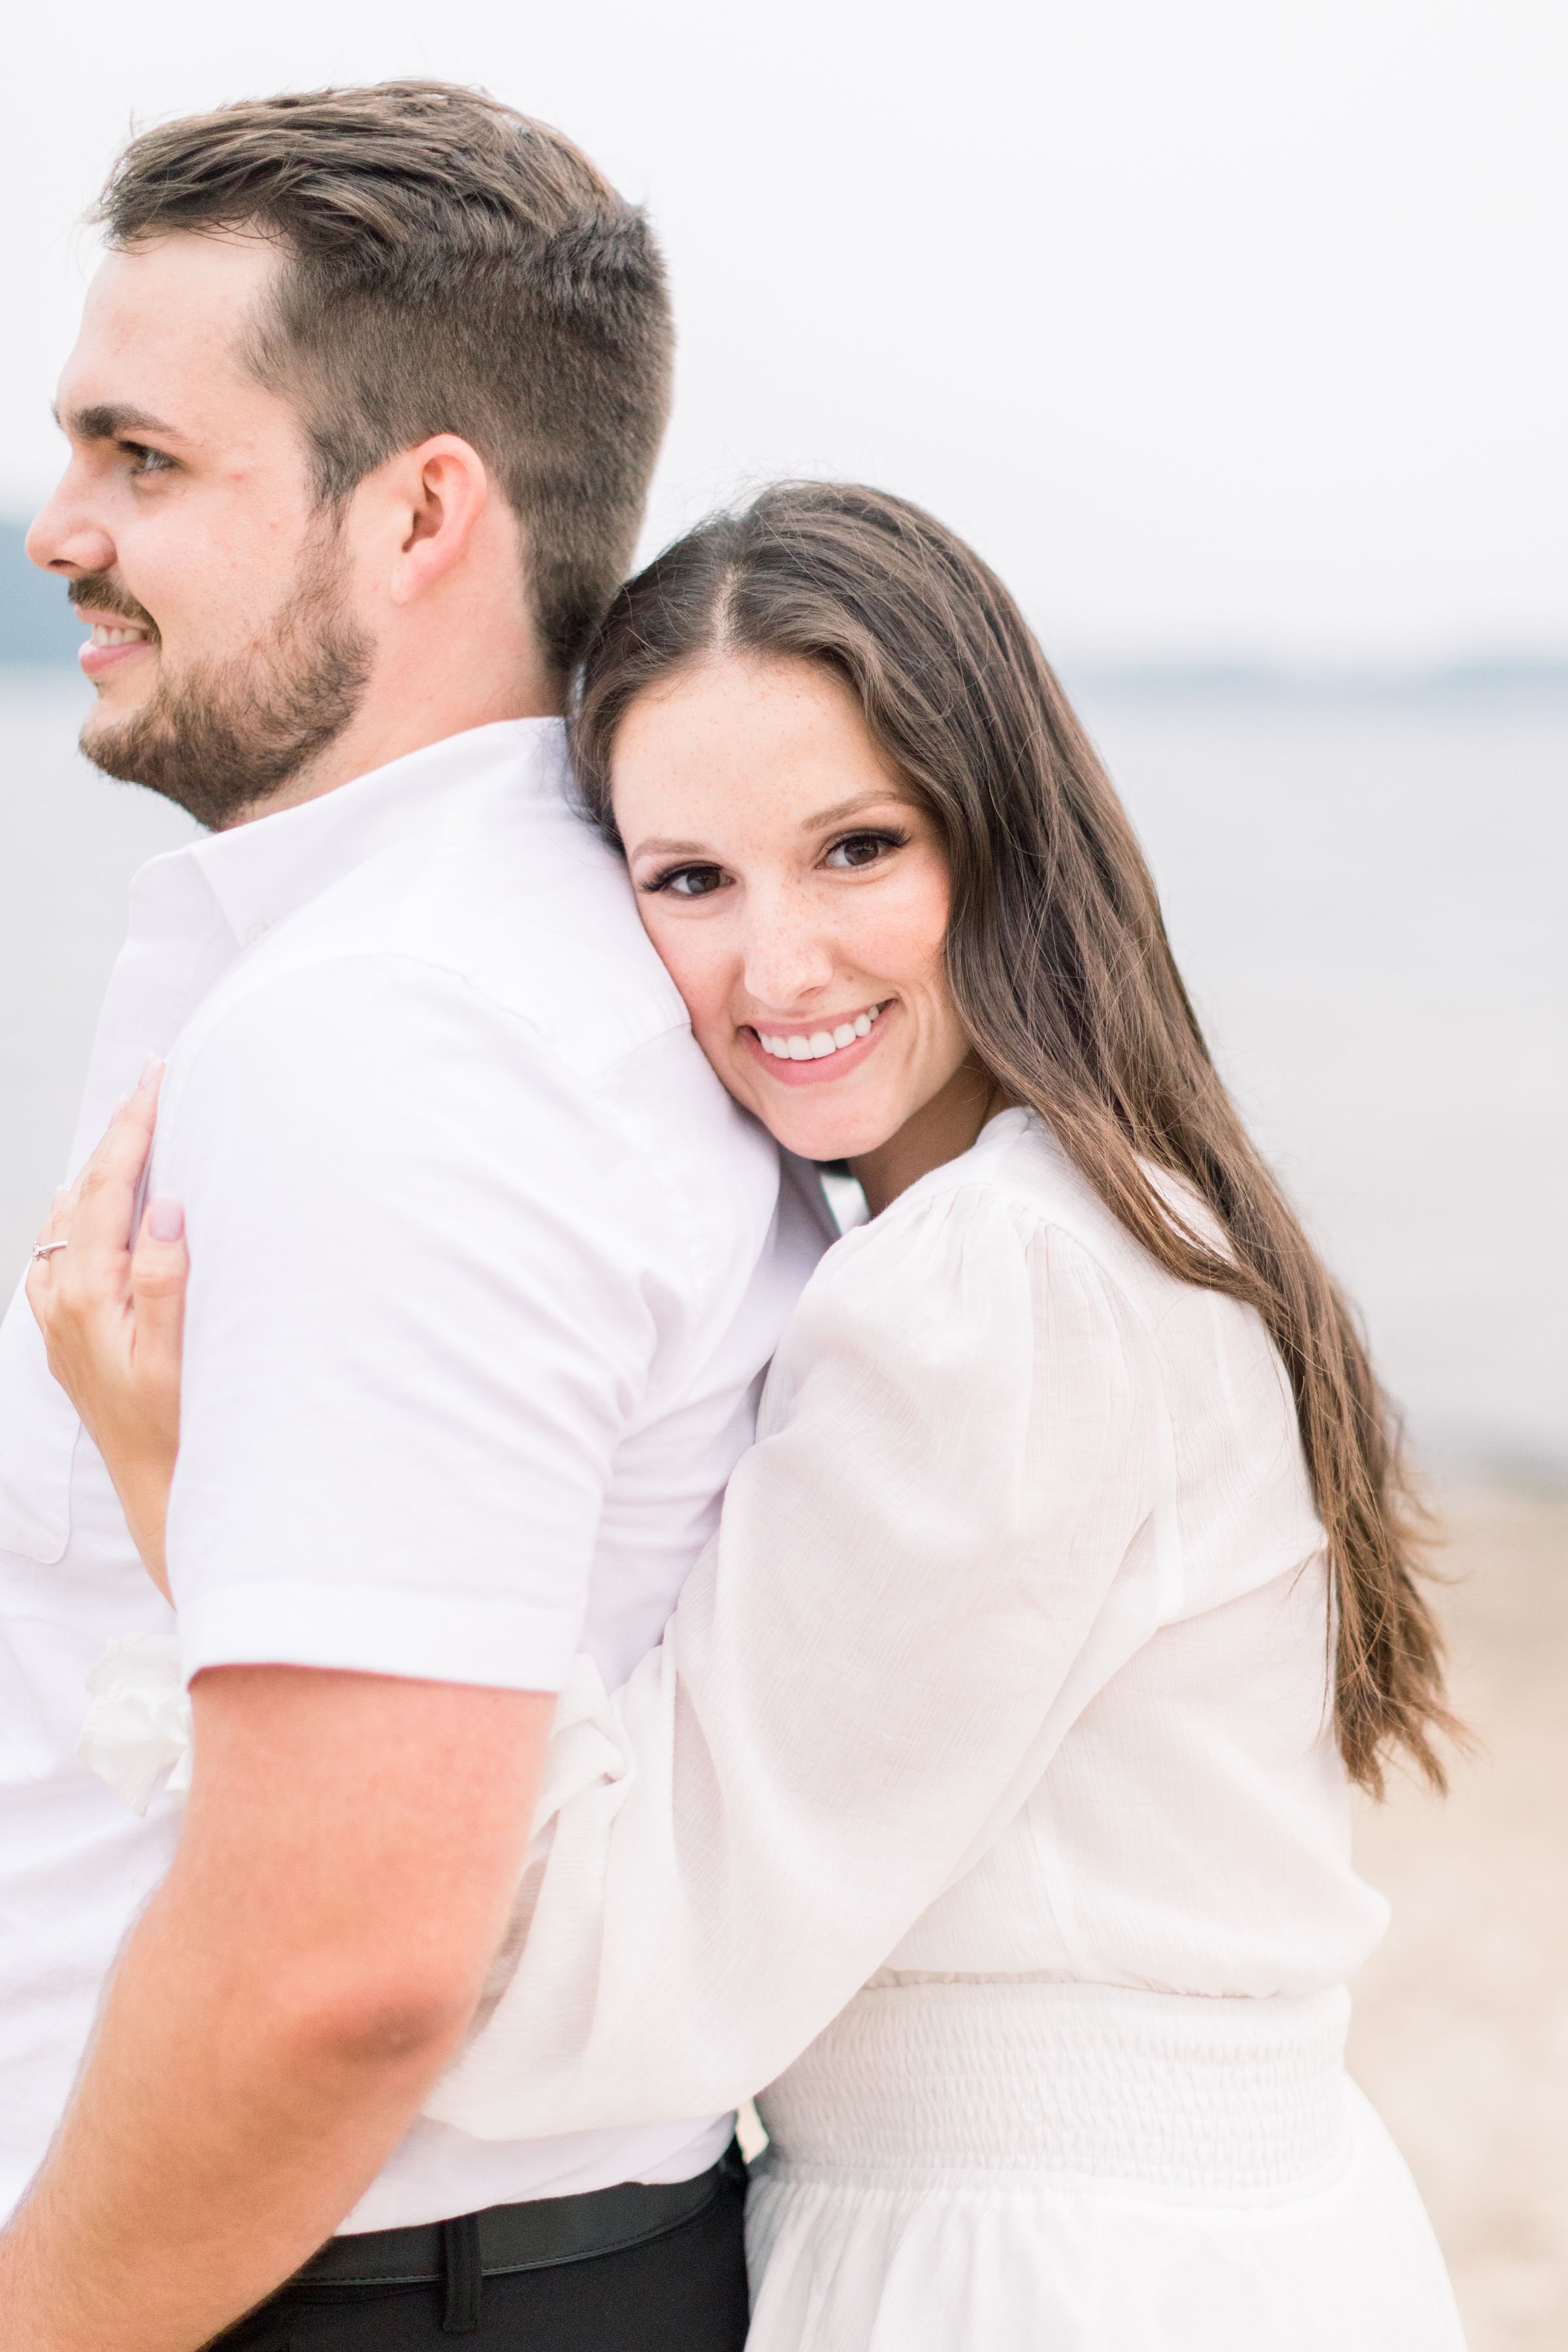  Portrait of a woman hugging a man from behind captured by Chelsea Mason Photography. professional engagements Kingston #Kingstonengagement #GrassCreekParkPortraits #Ontarioengagementphotographers #Chelseamasonphotography #Chelseamasonengagements 